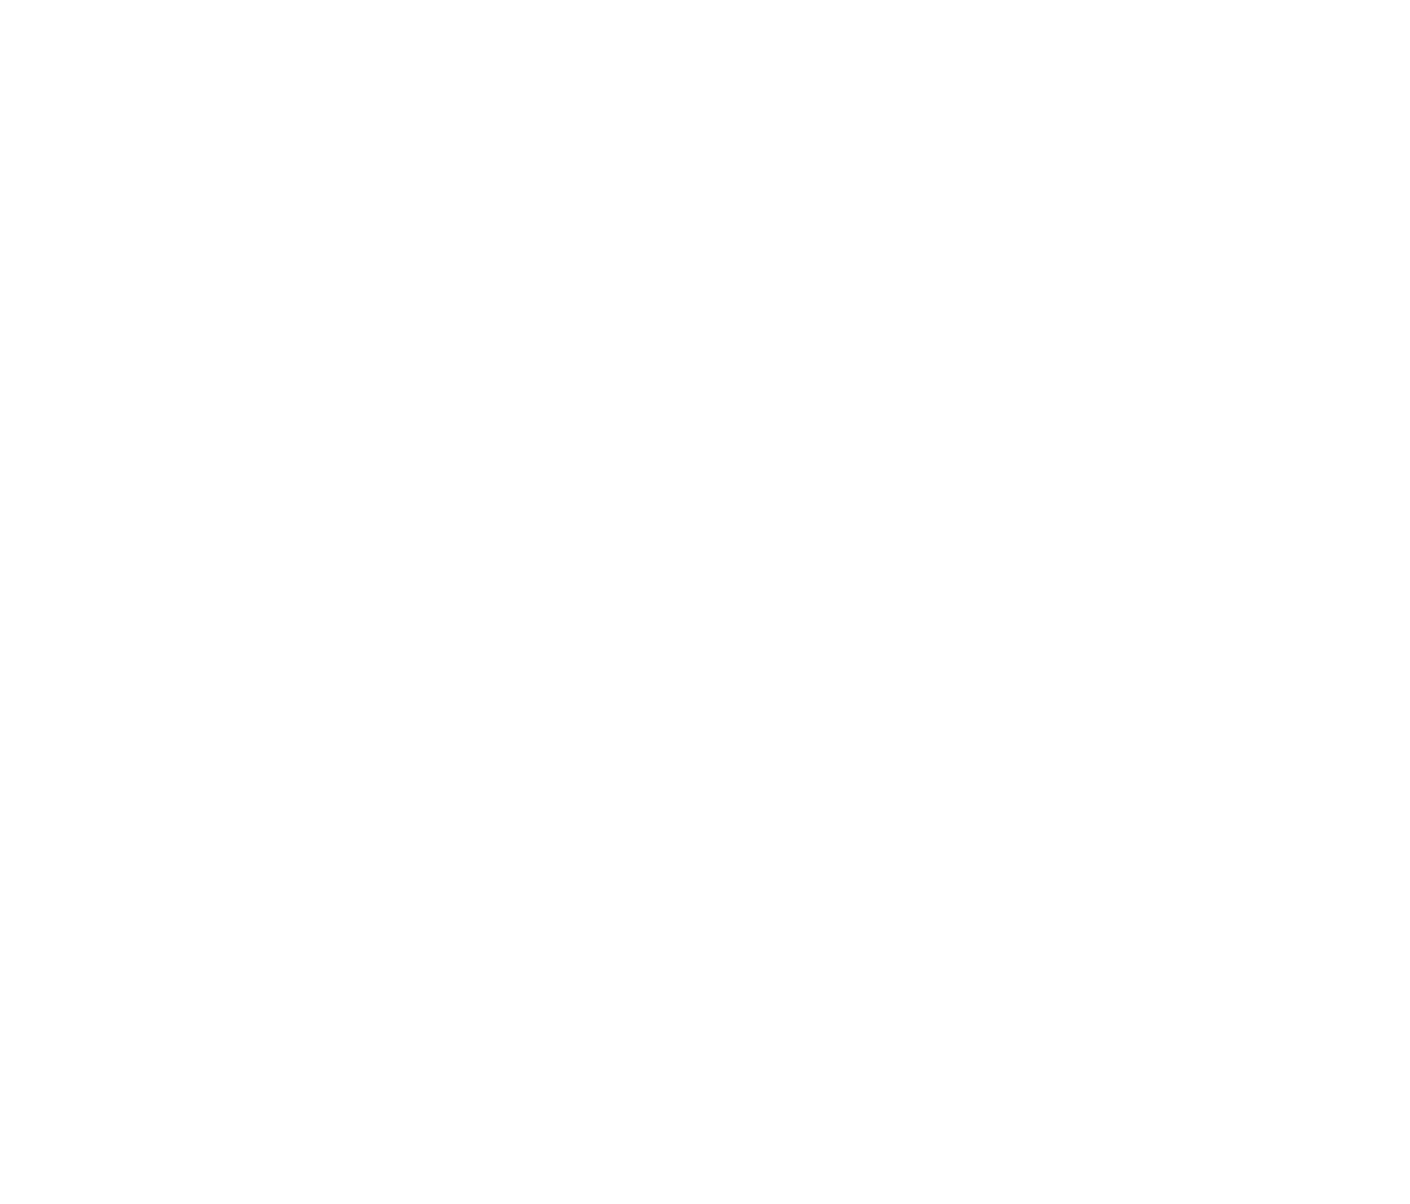 Independent School of the Year Awards 2021 - Outstanding Response to Covid-19